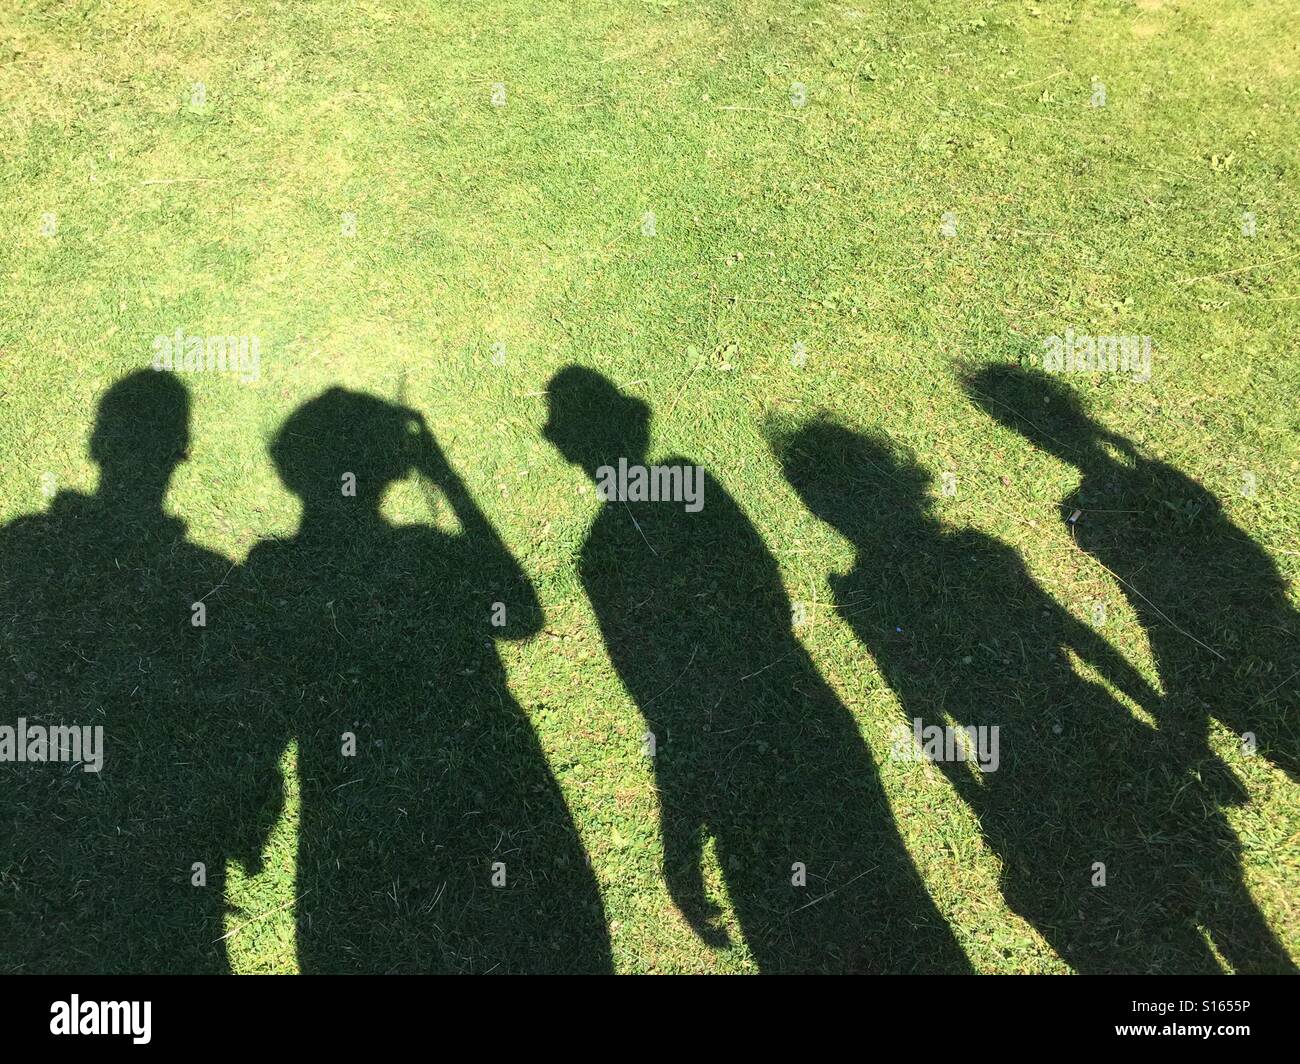 Shadows of a family on grass Stock Photo